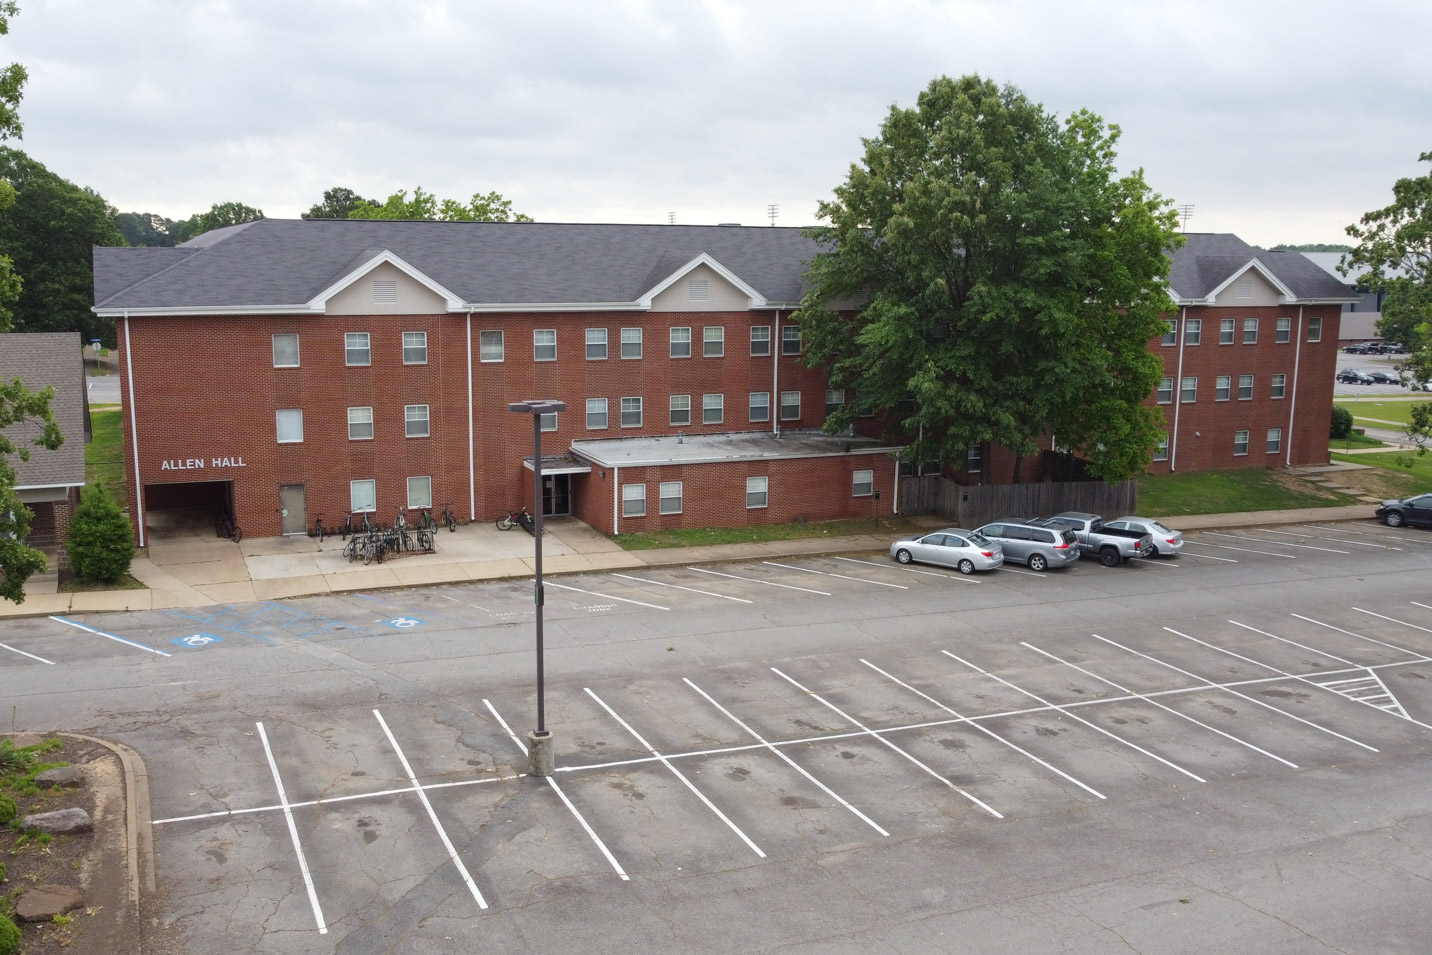 This is a photo of Allen Hall, a men's residence hall at Harding University.